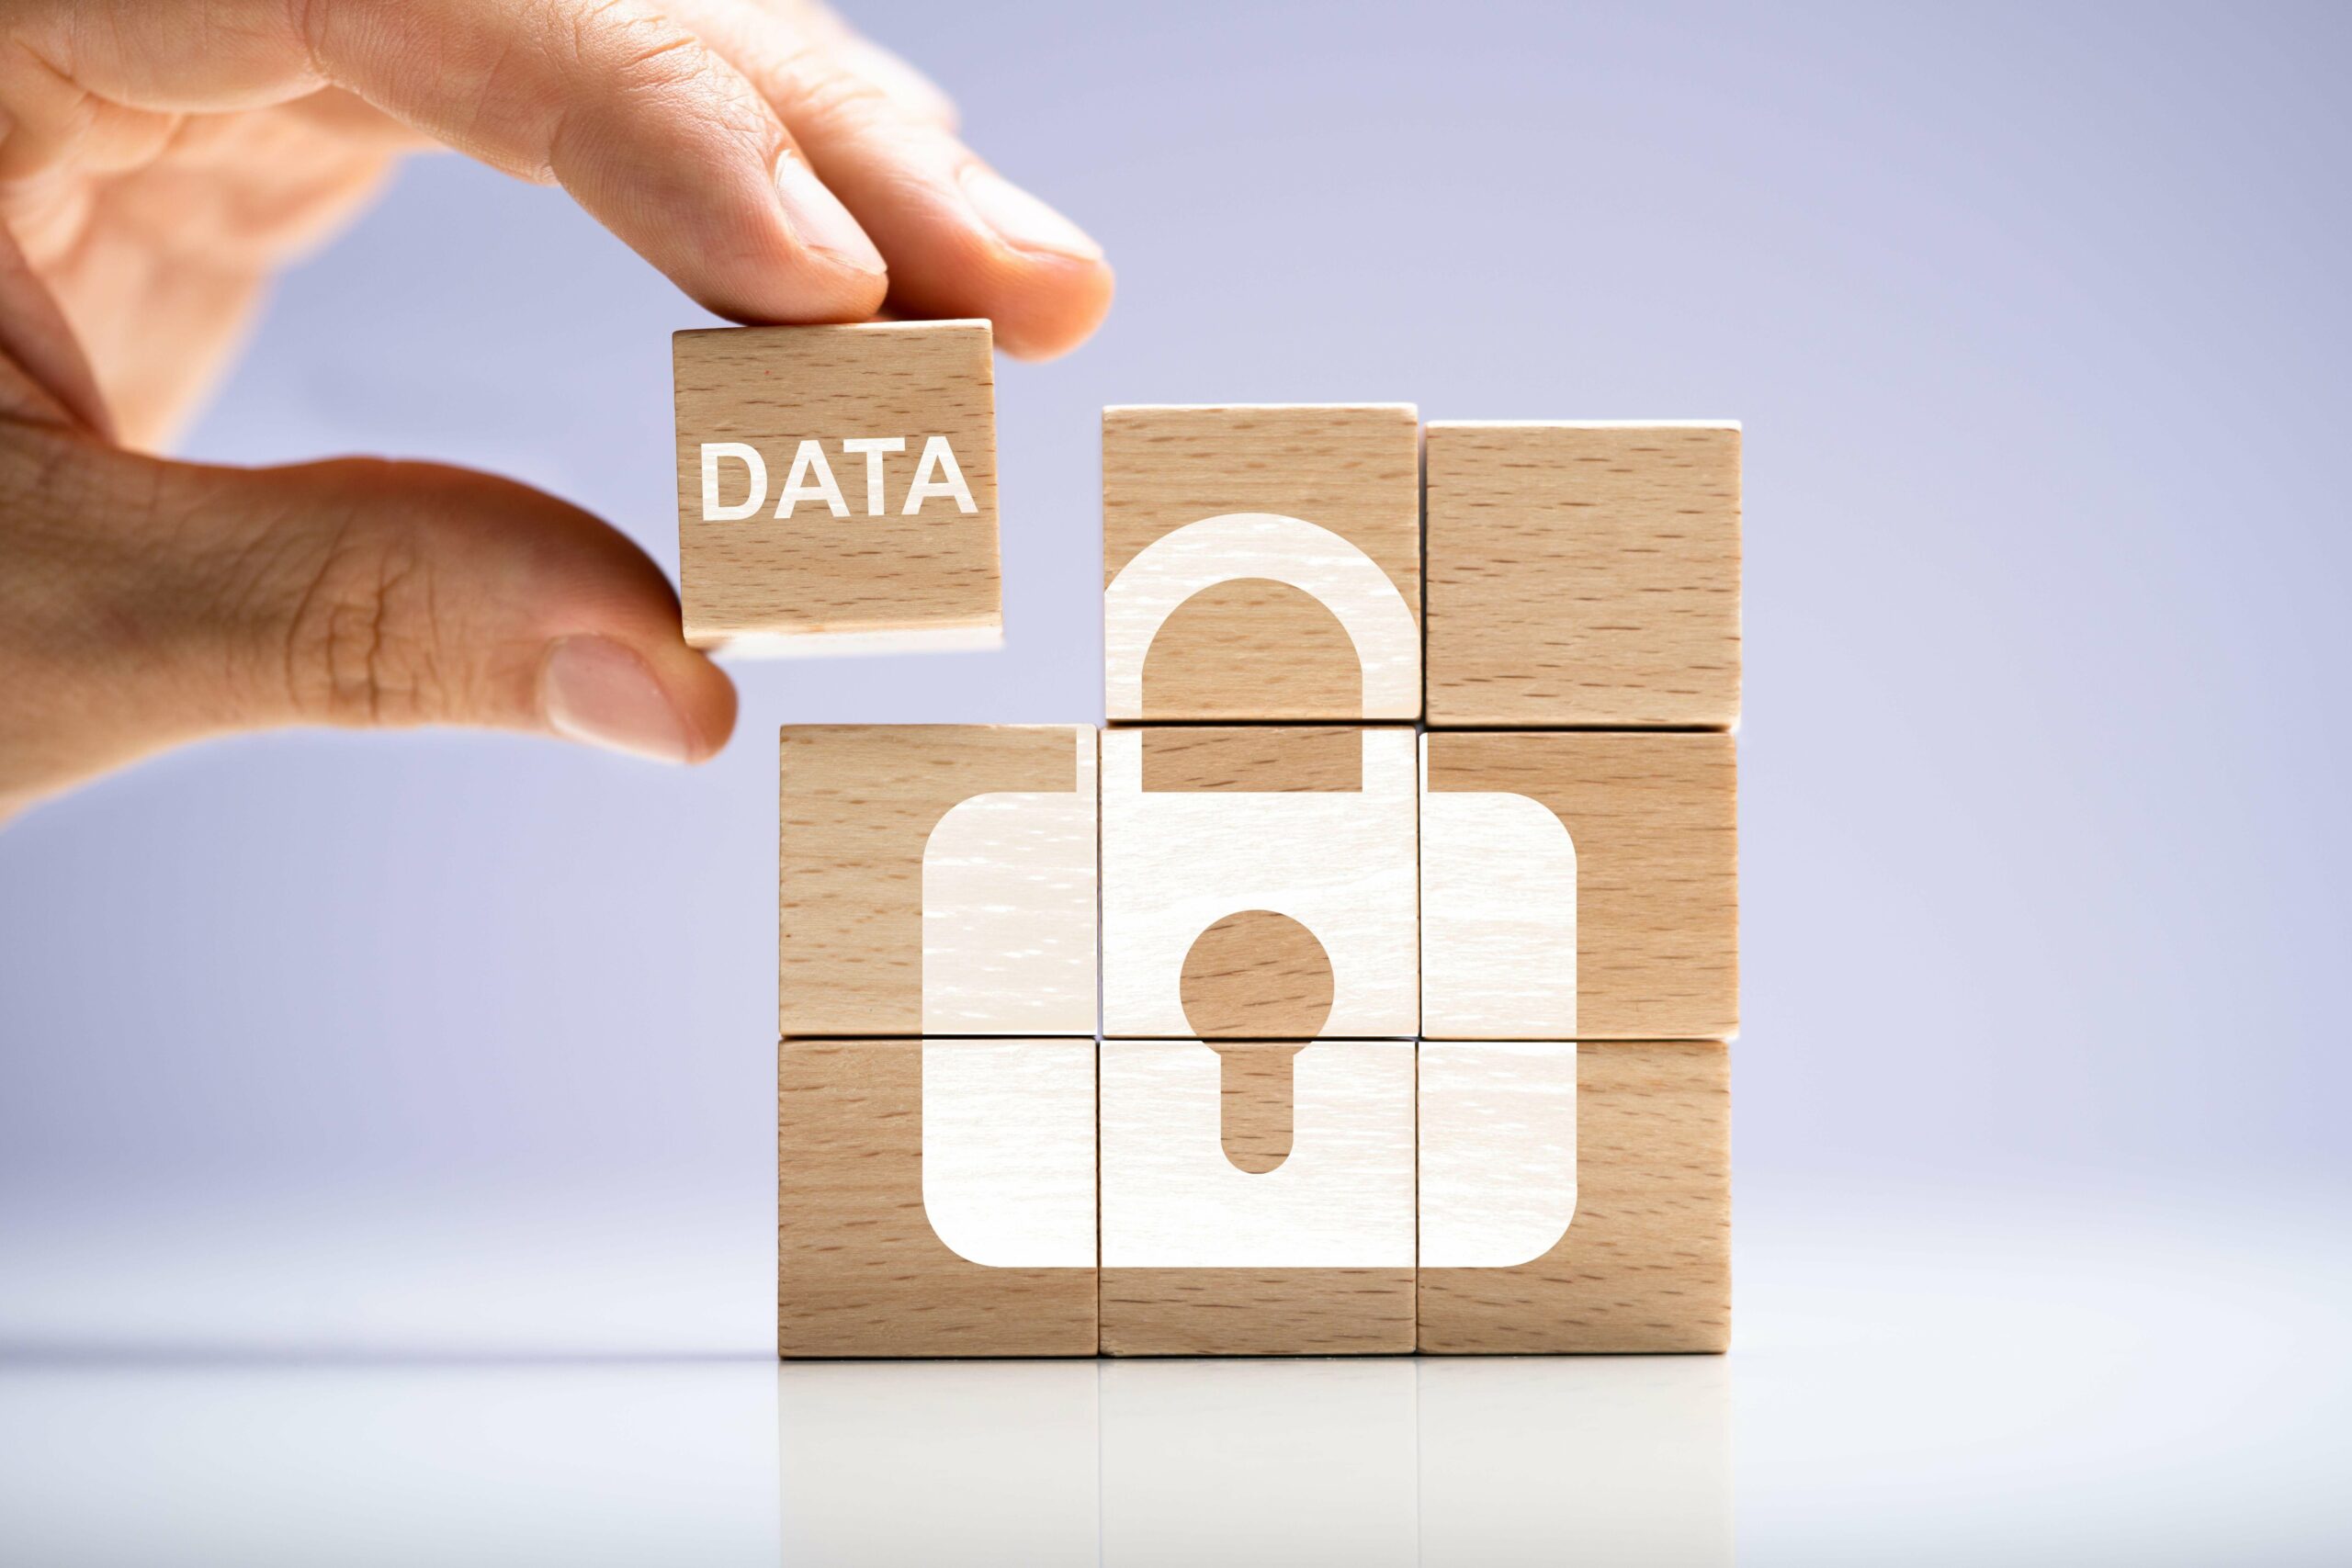 3 Strategies to Future-Proof Data Privacy